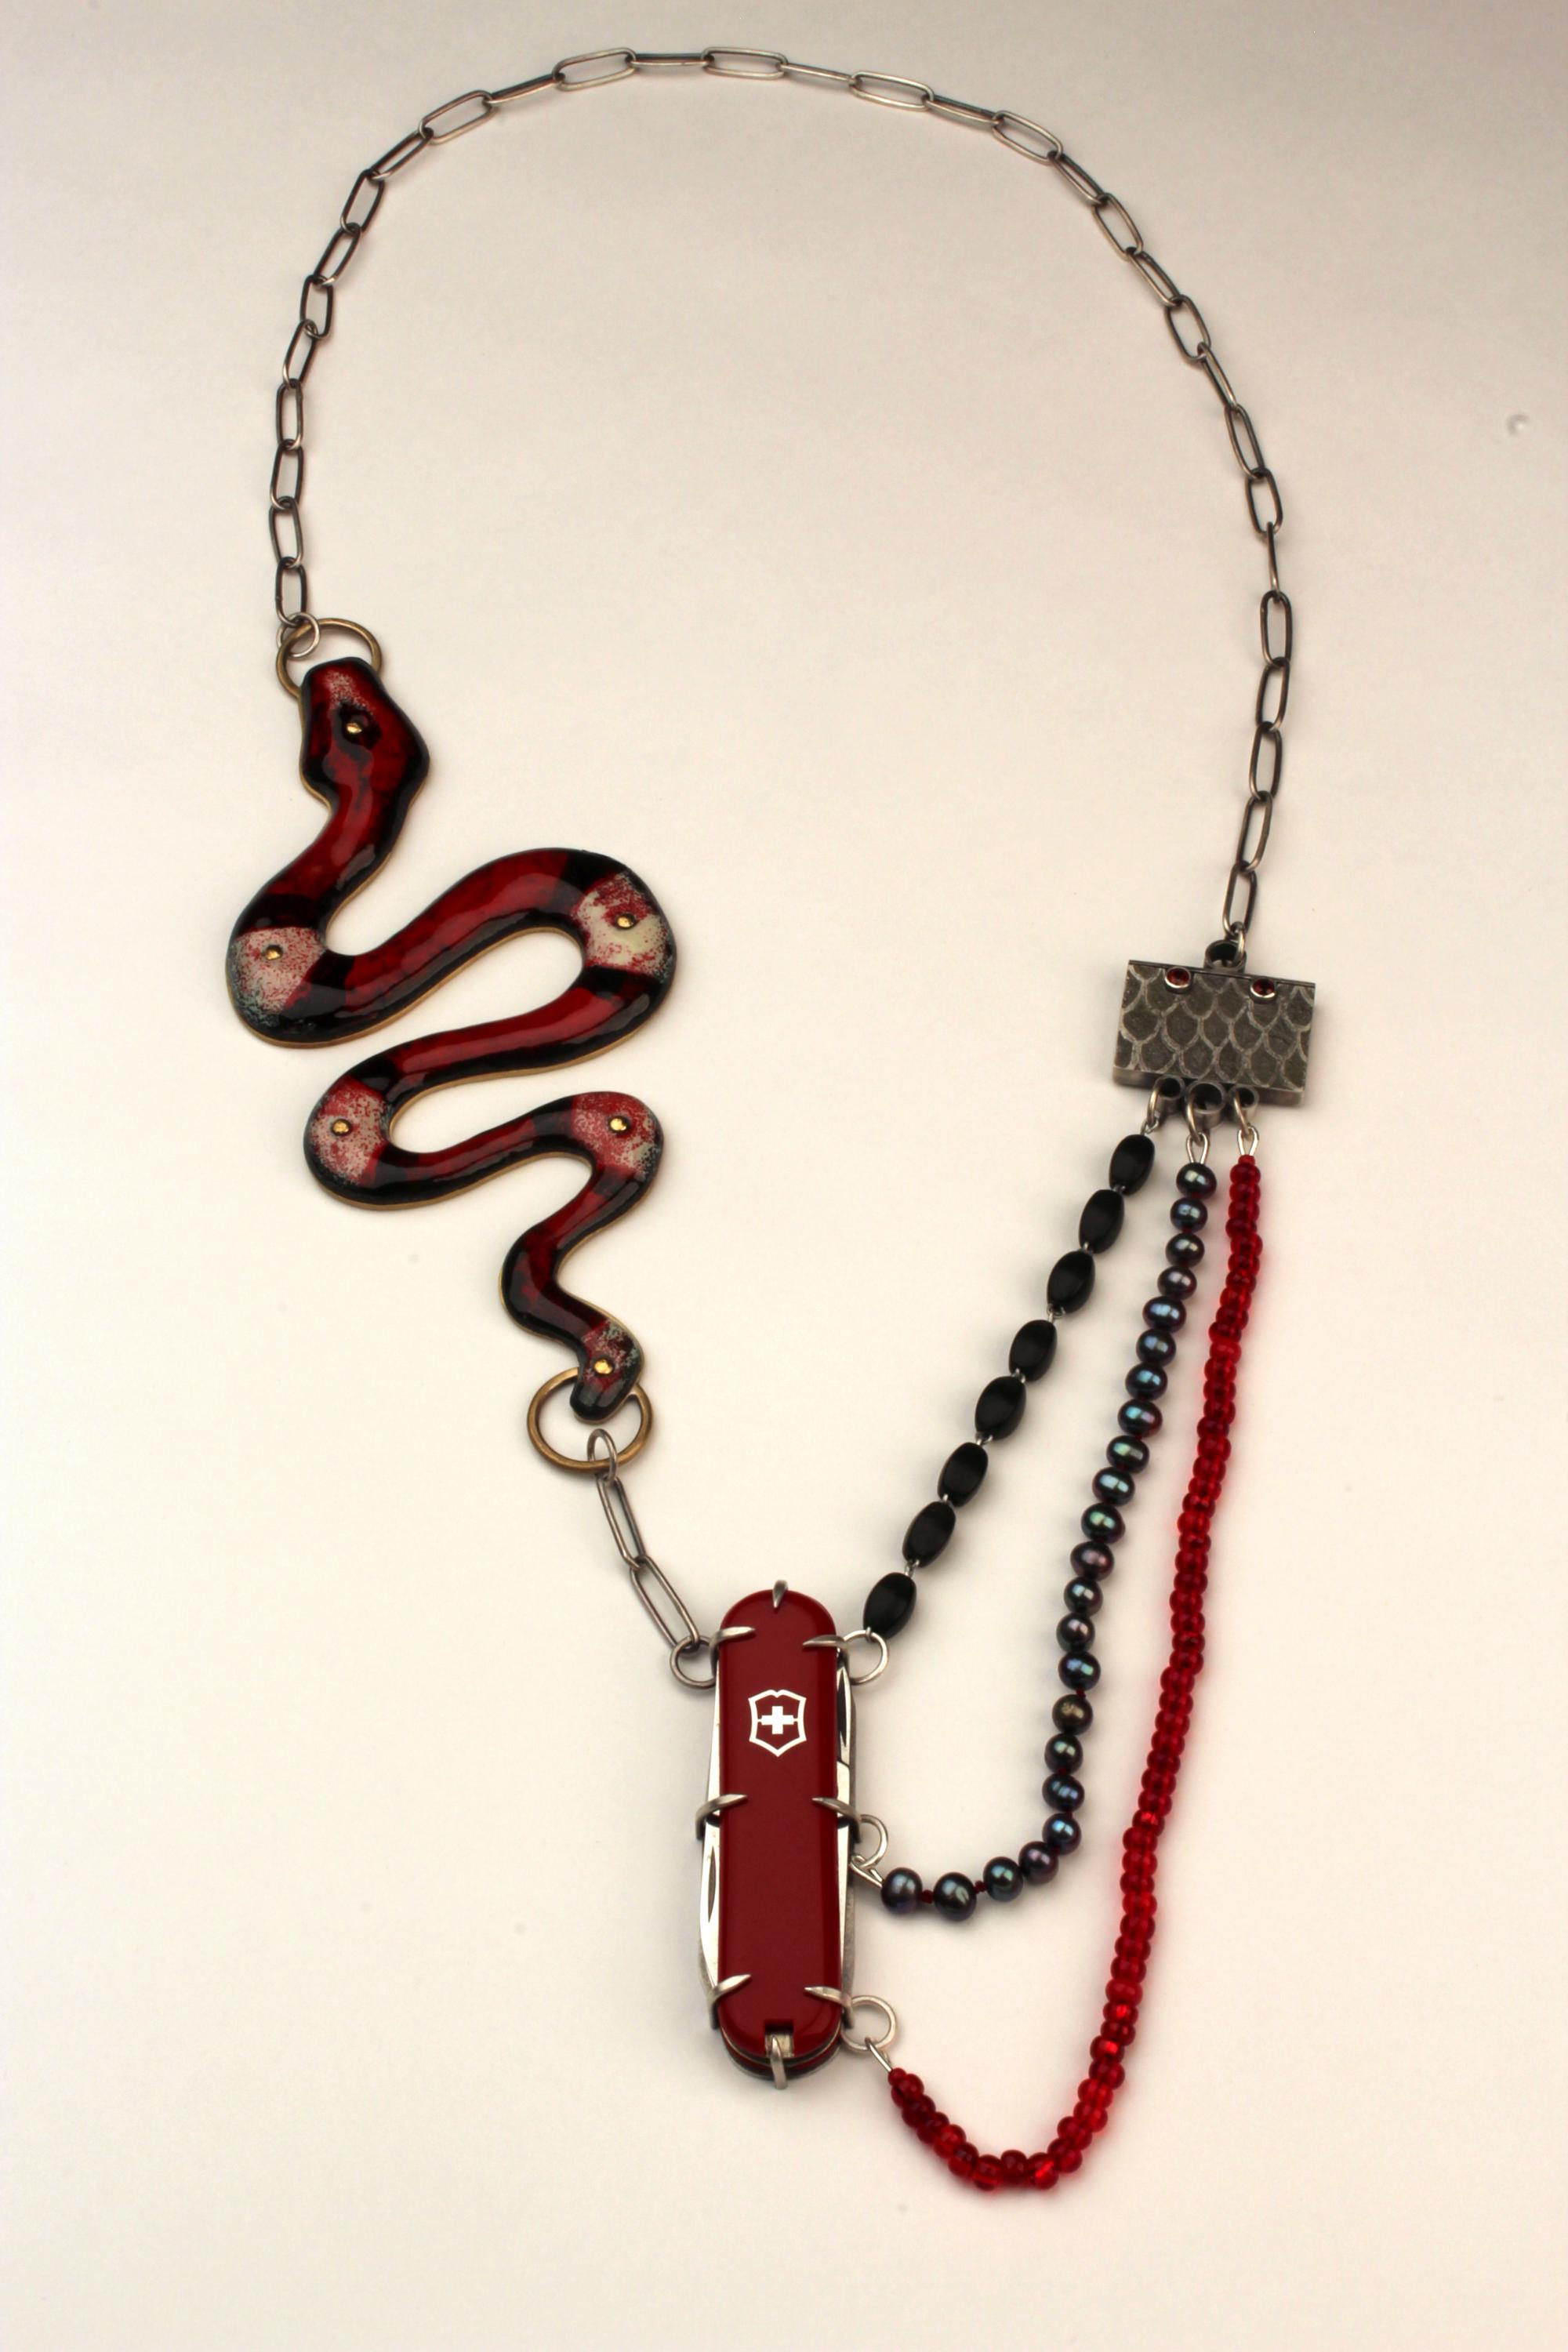 a necklace made with an snake, chain, swiss army knife and beads